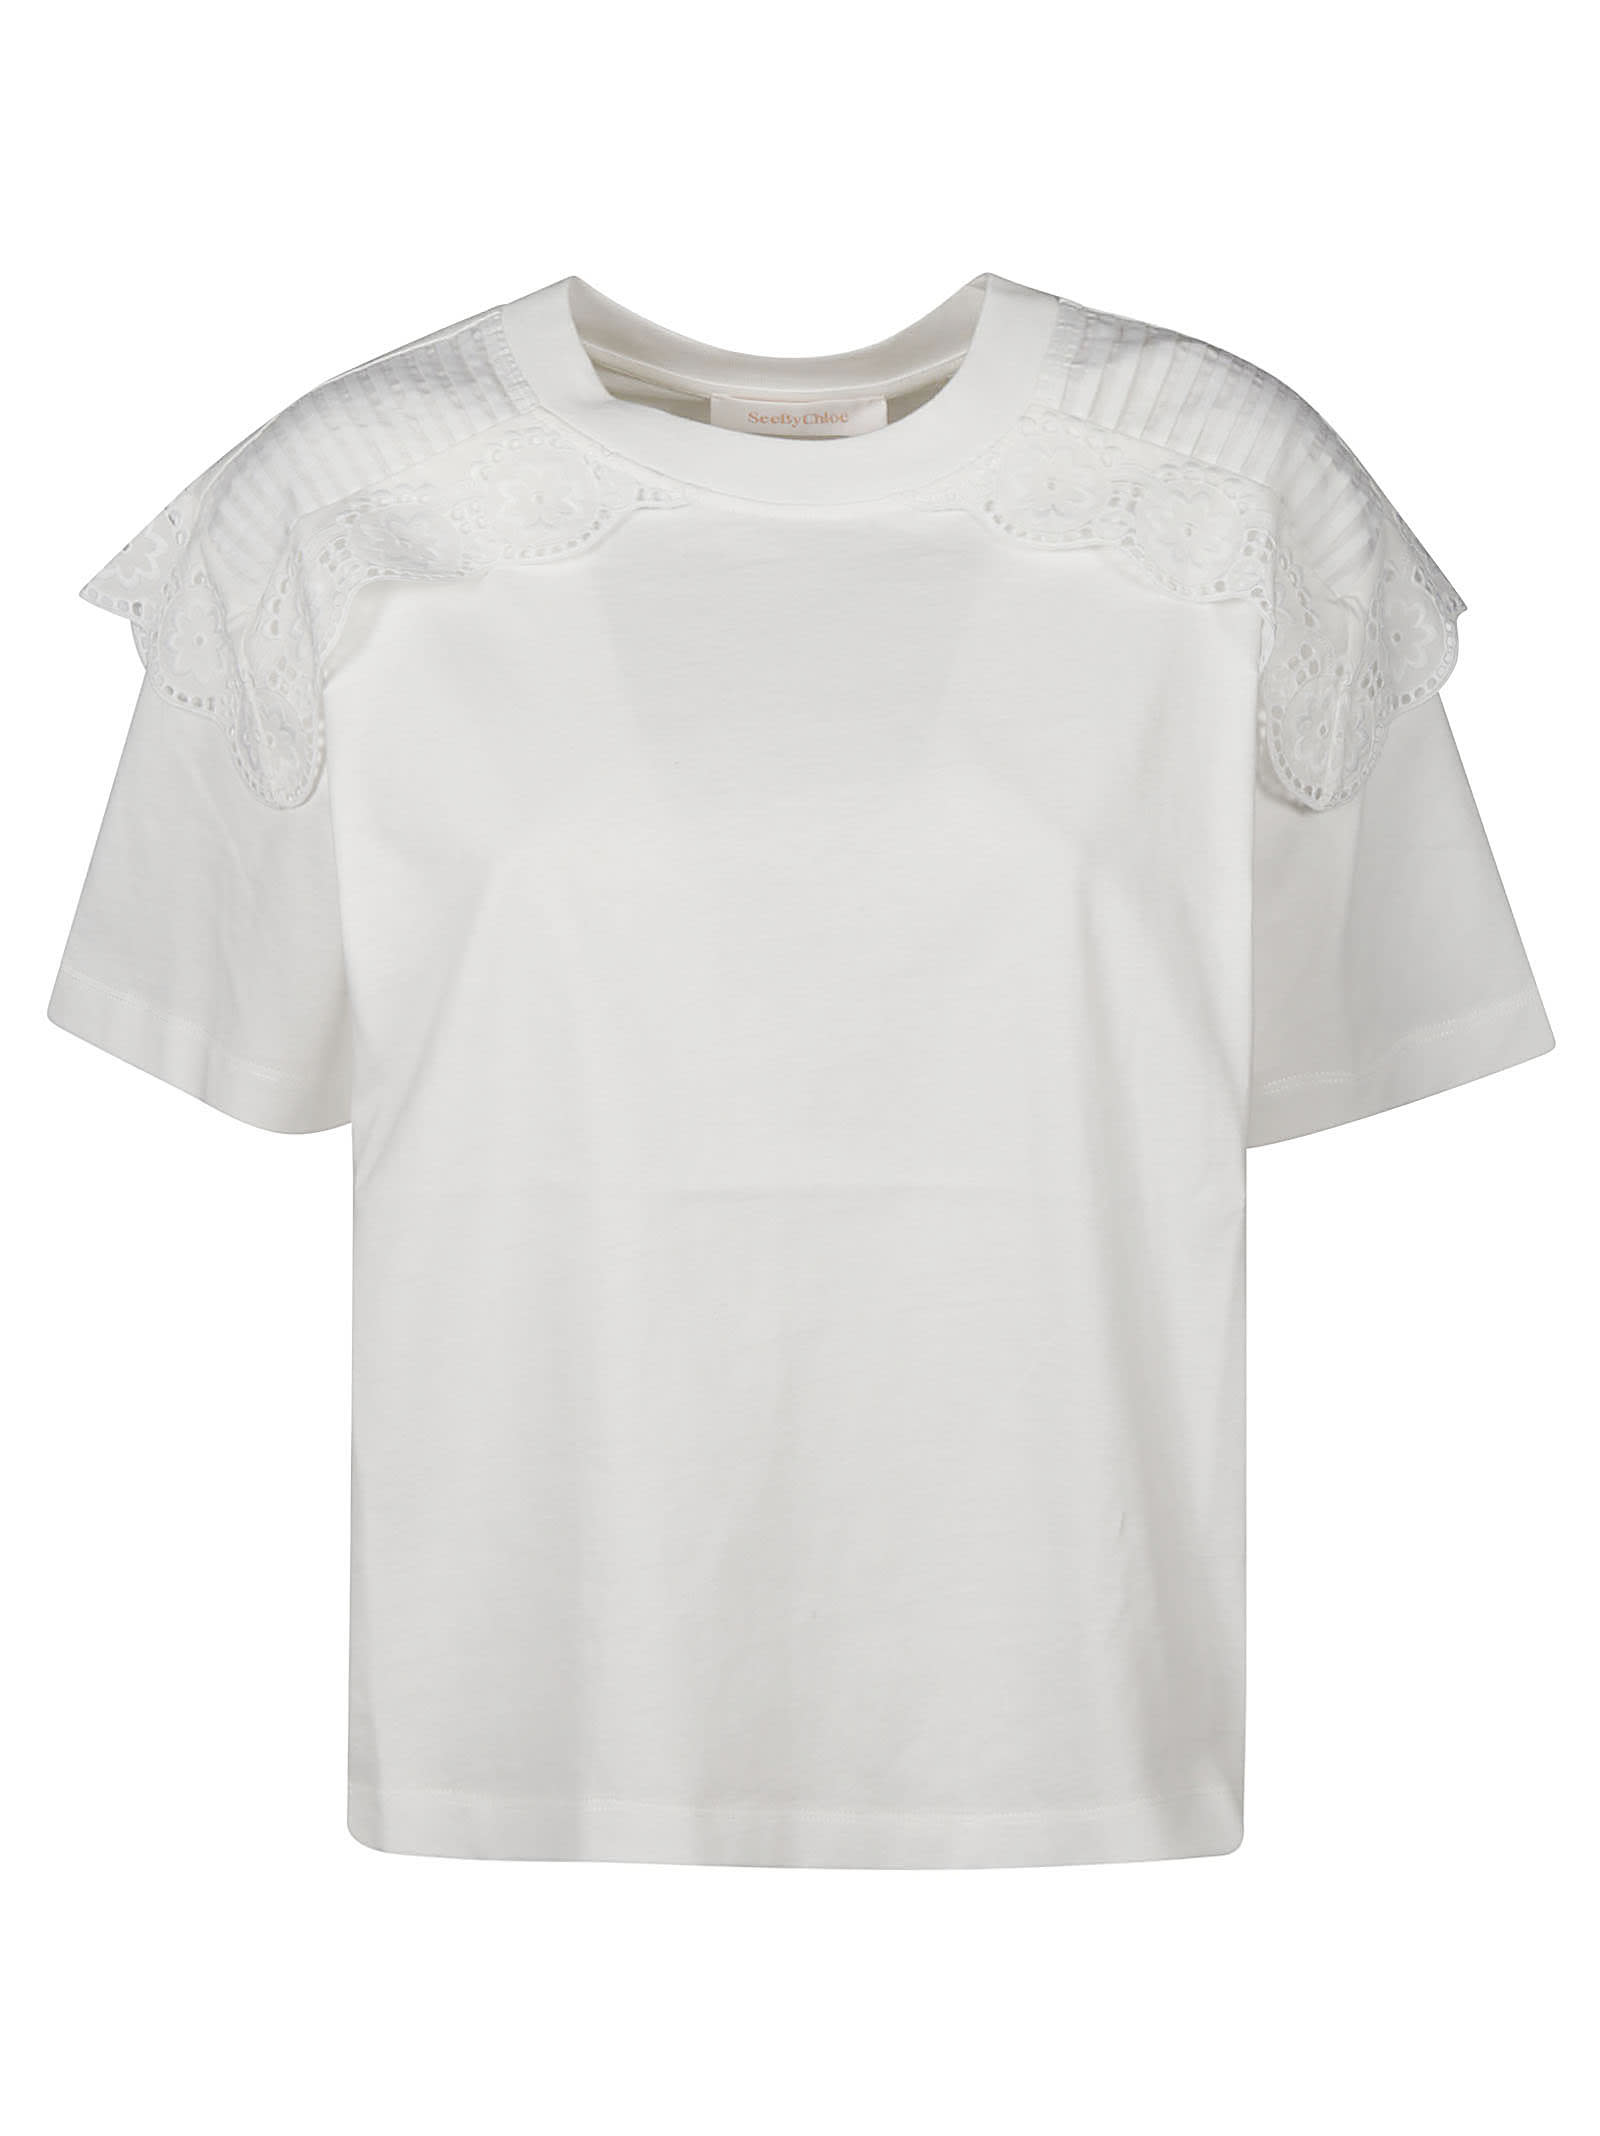 See by Chloé Layered T-shirt